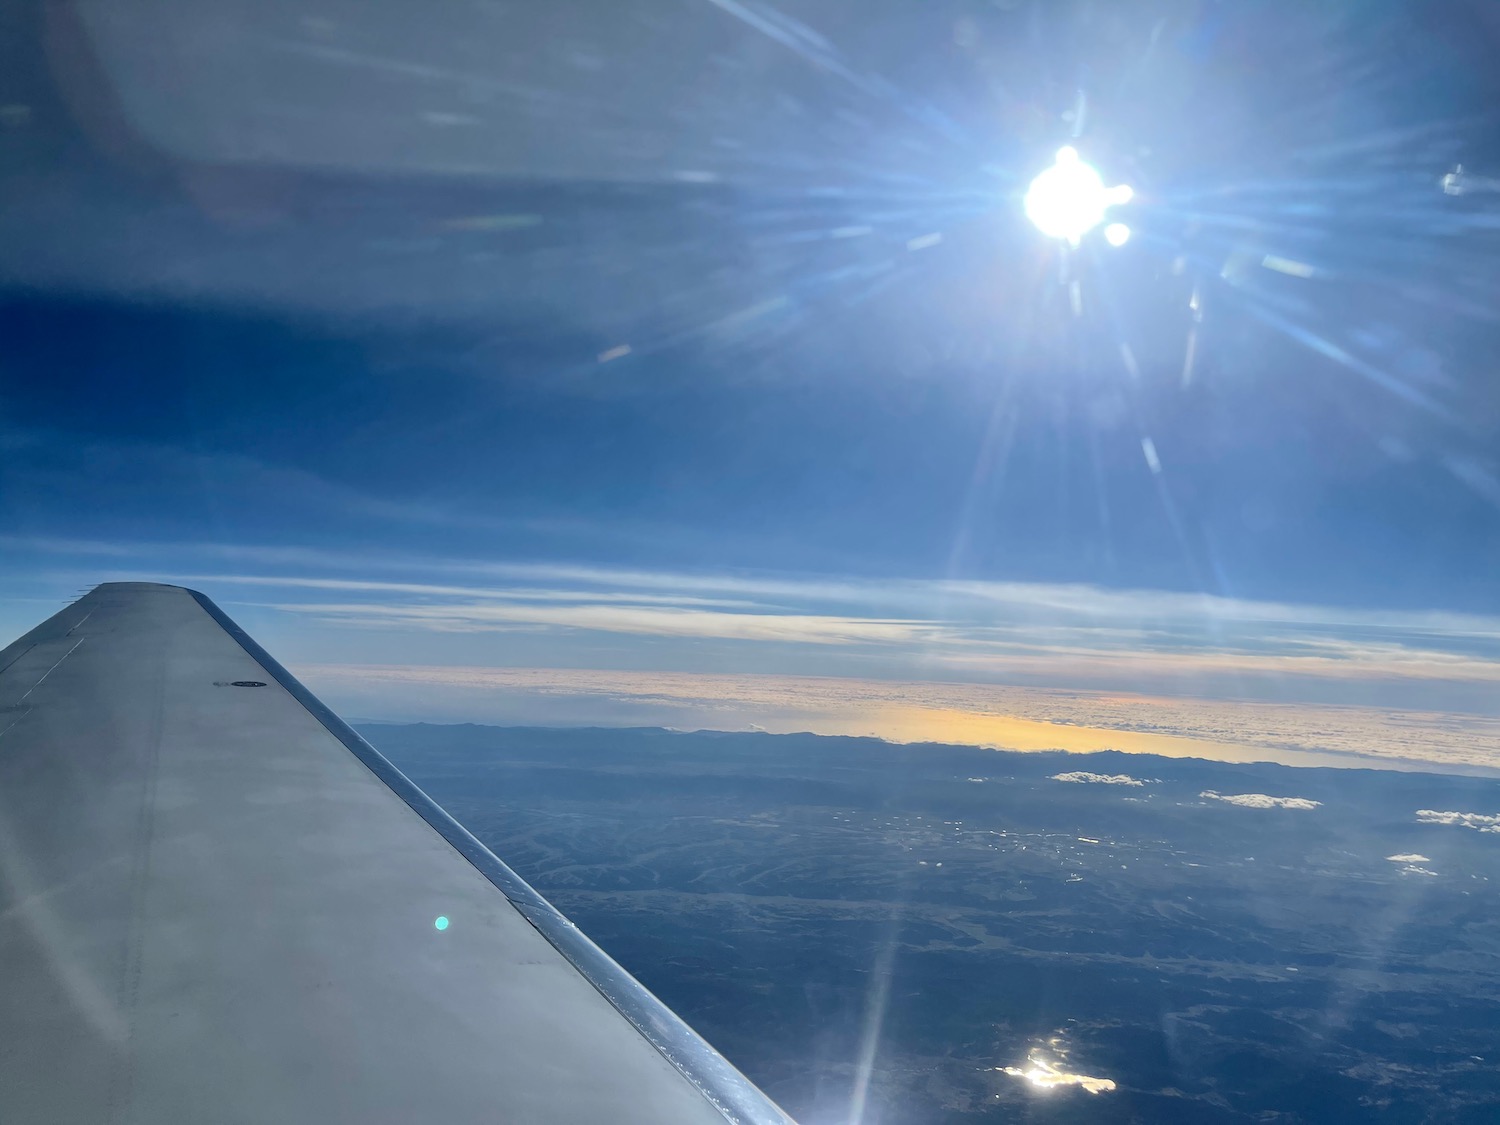 a wing of an airplane with the sun shining through the clouds